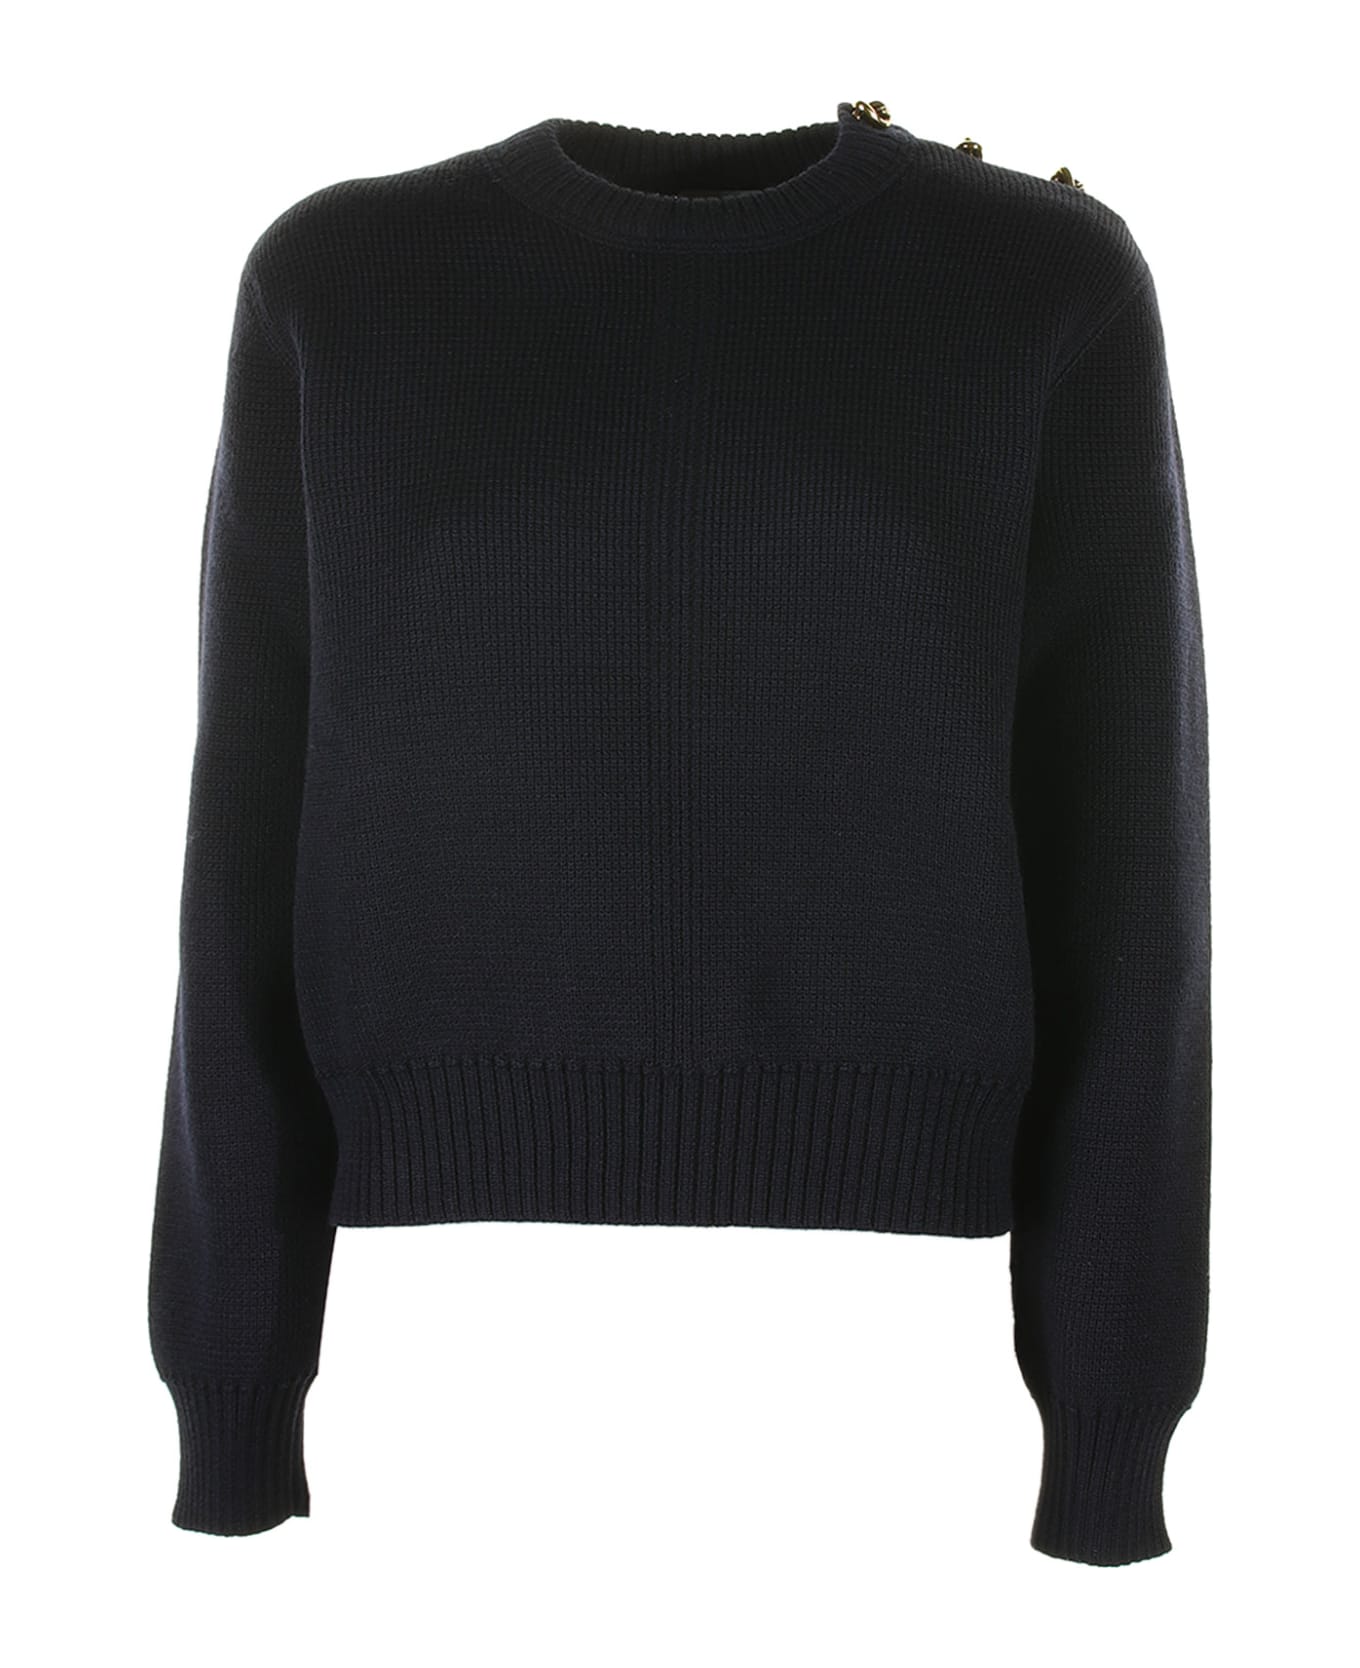 Bottega Veneta Wool Sweater With Metal Knot Buttons - ABISSO BLUE